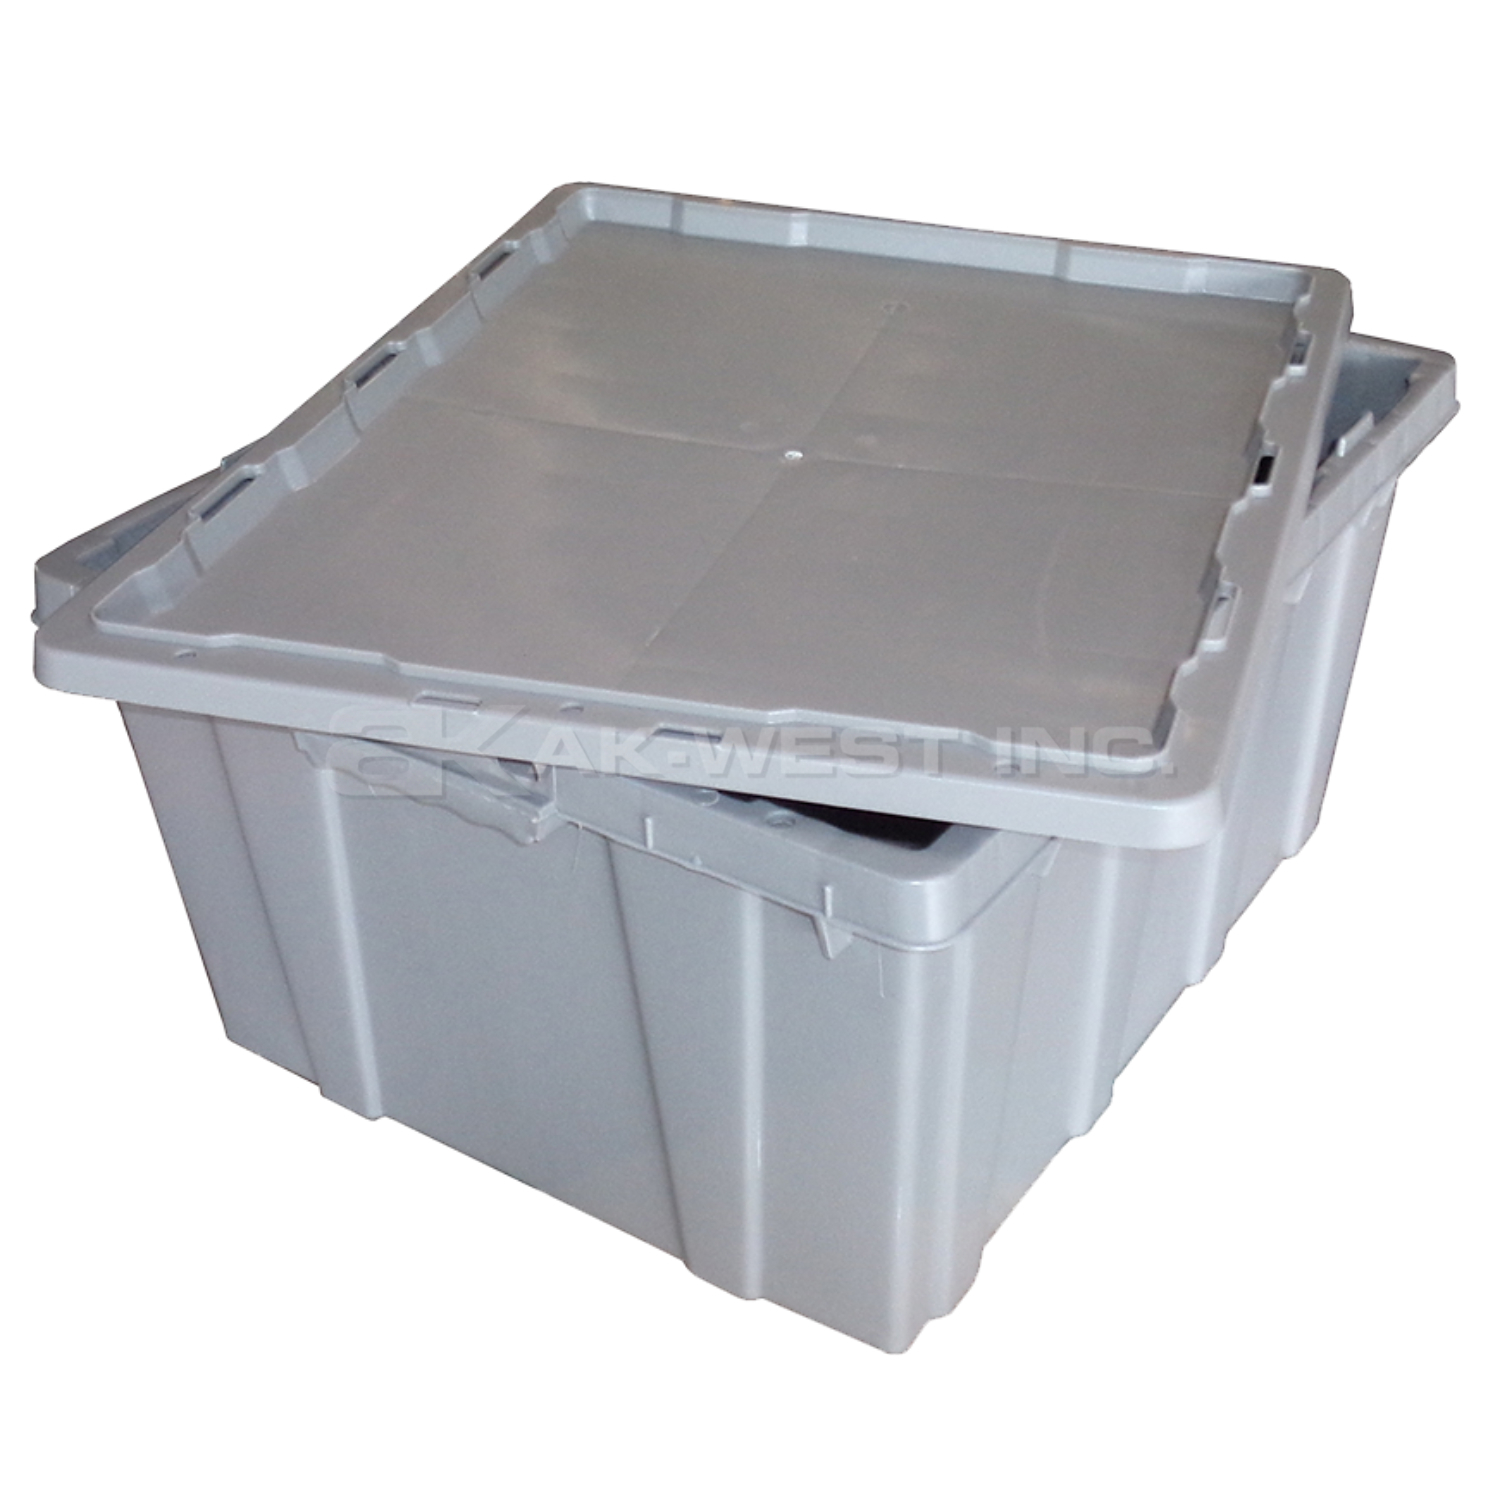 Grey, 24" x 20" x 12", Smooth Bottom, Detached Lid Container